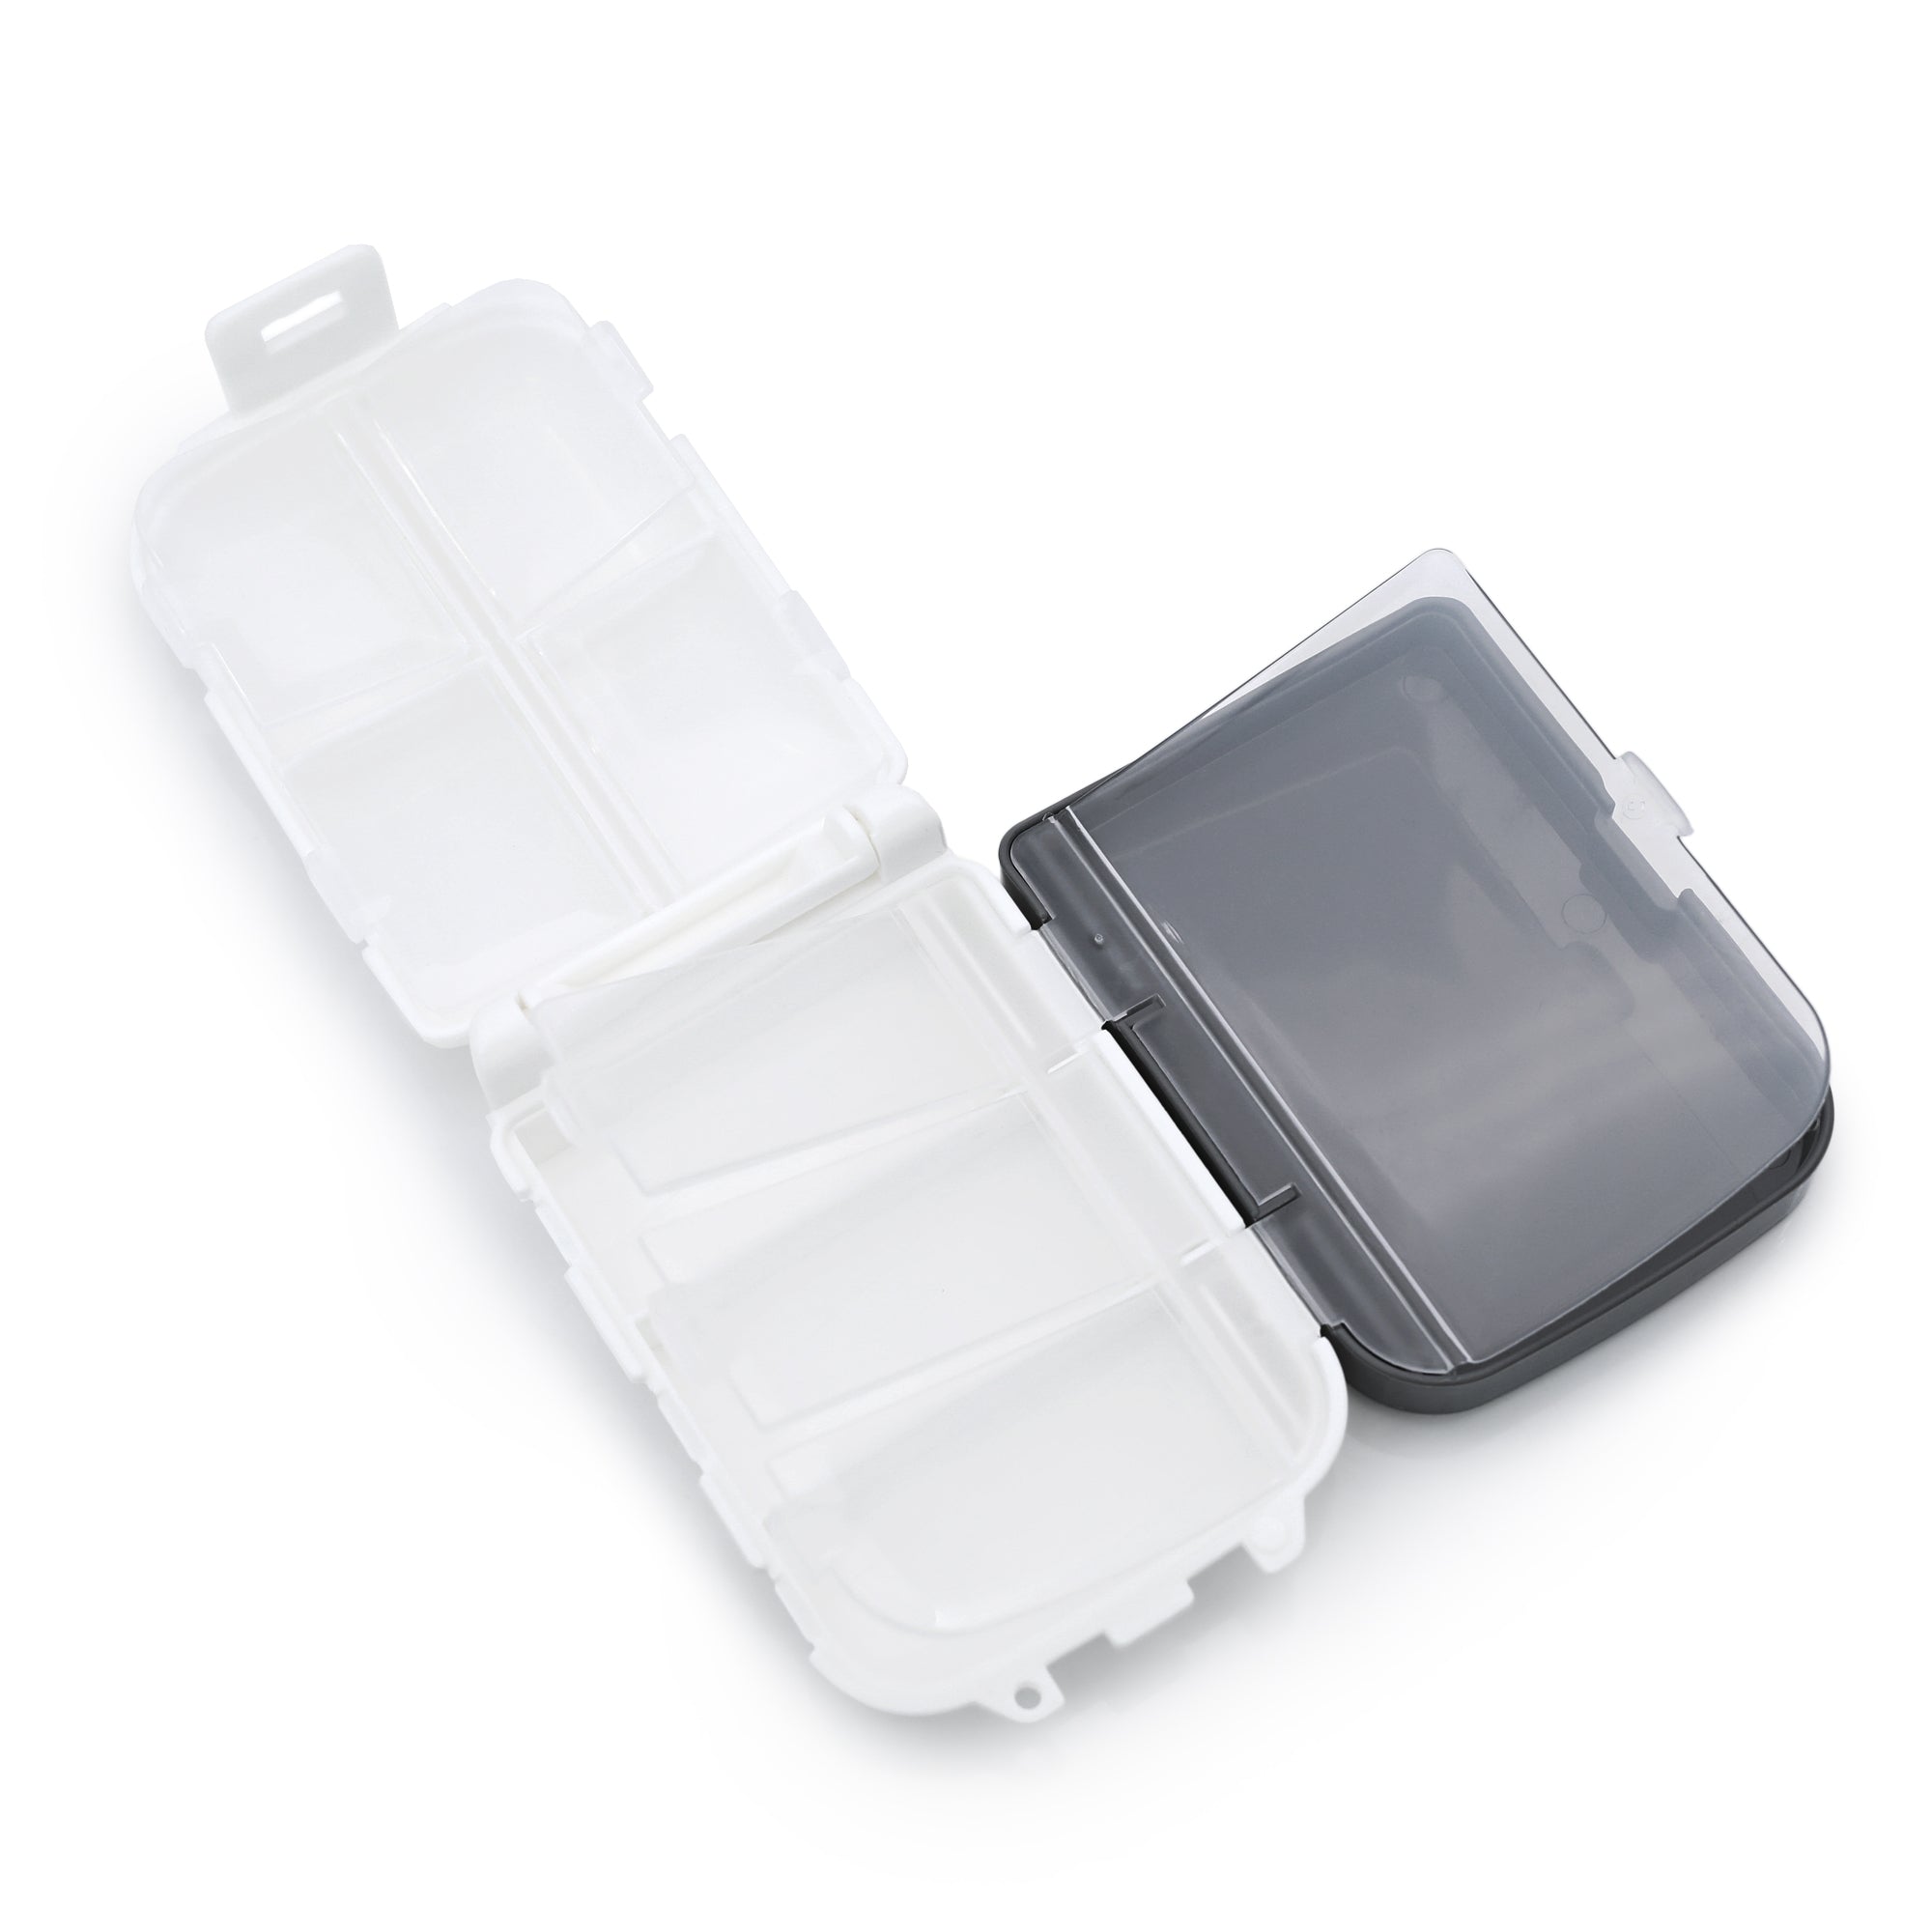 8 Slots Container for Watch Band Spring Bars, Buckles and Watch Parts, White